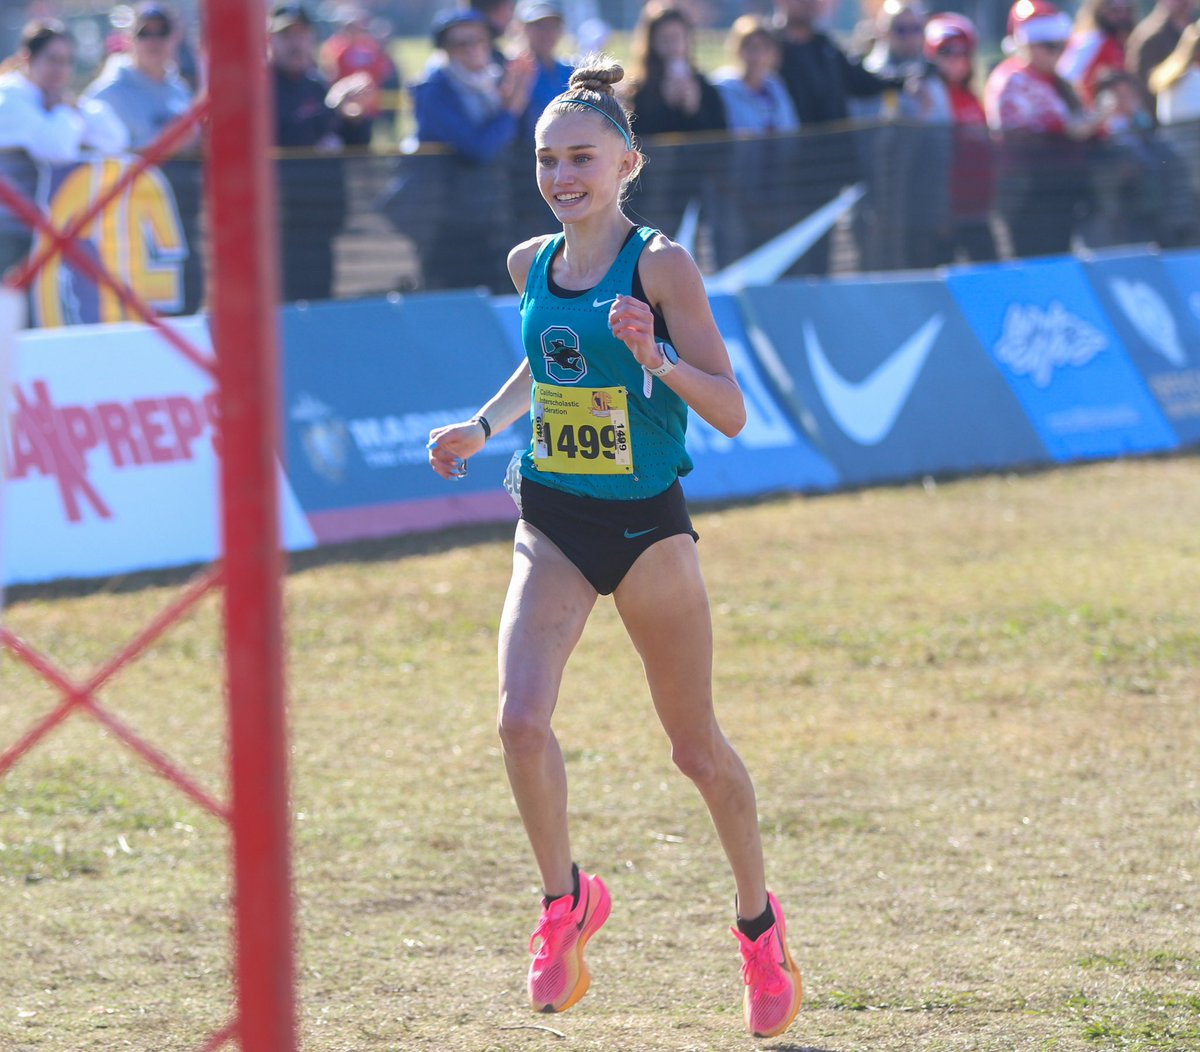 Rylee Blade of Santiago (Corona) wins the D1 State Meet in a a time of 16:48.5